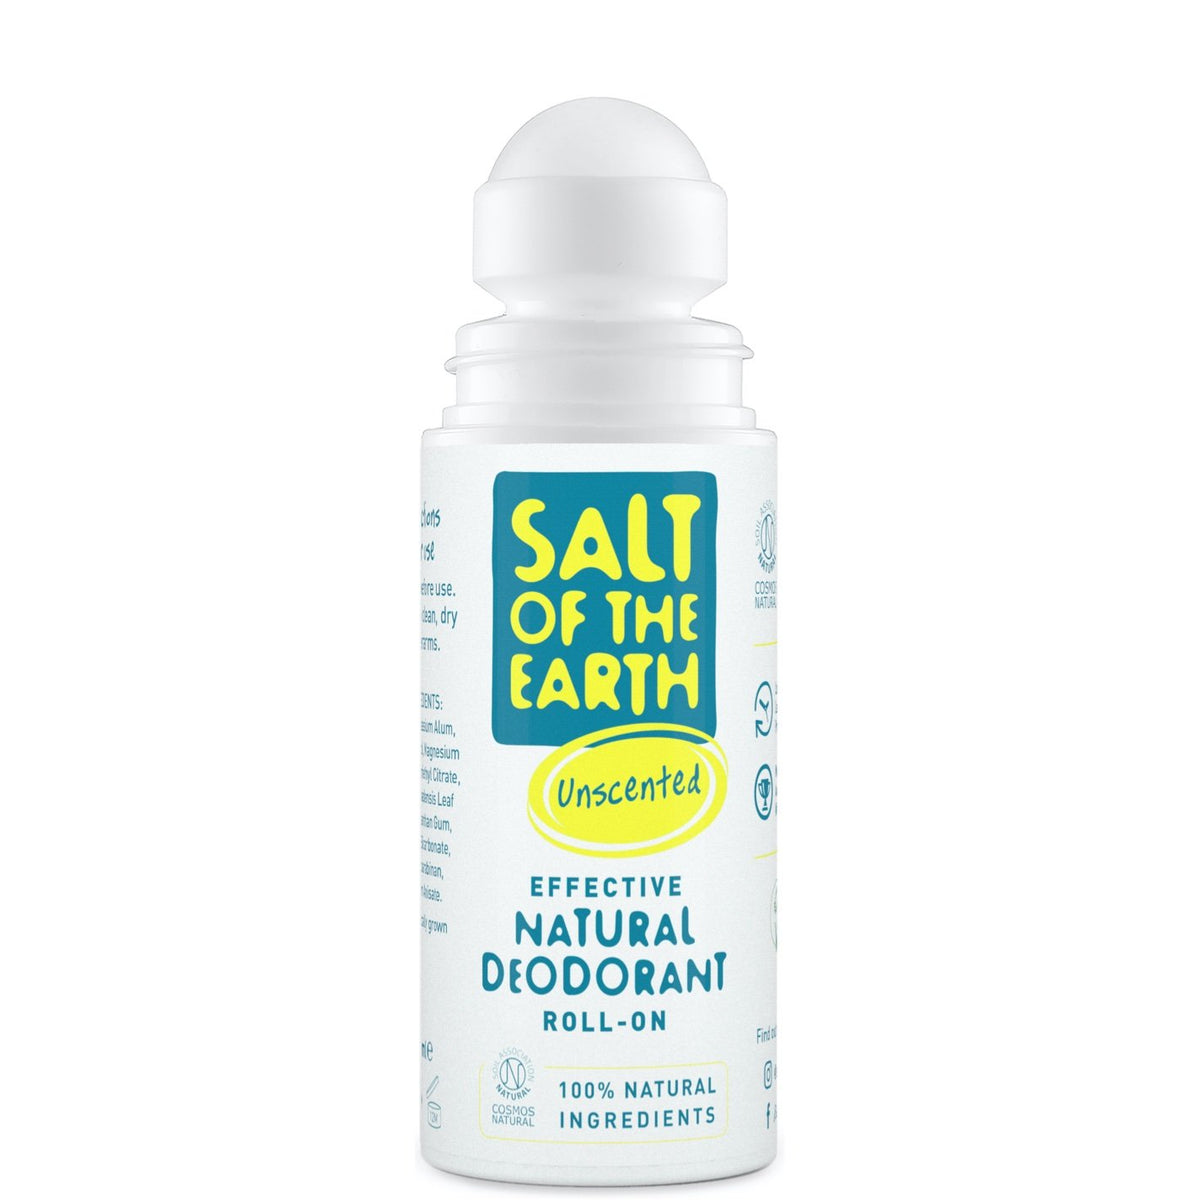 Unscented Roll-On Deodorant Salt of the Earth Showing Roller Ball